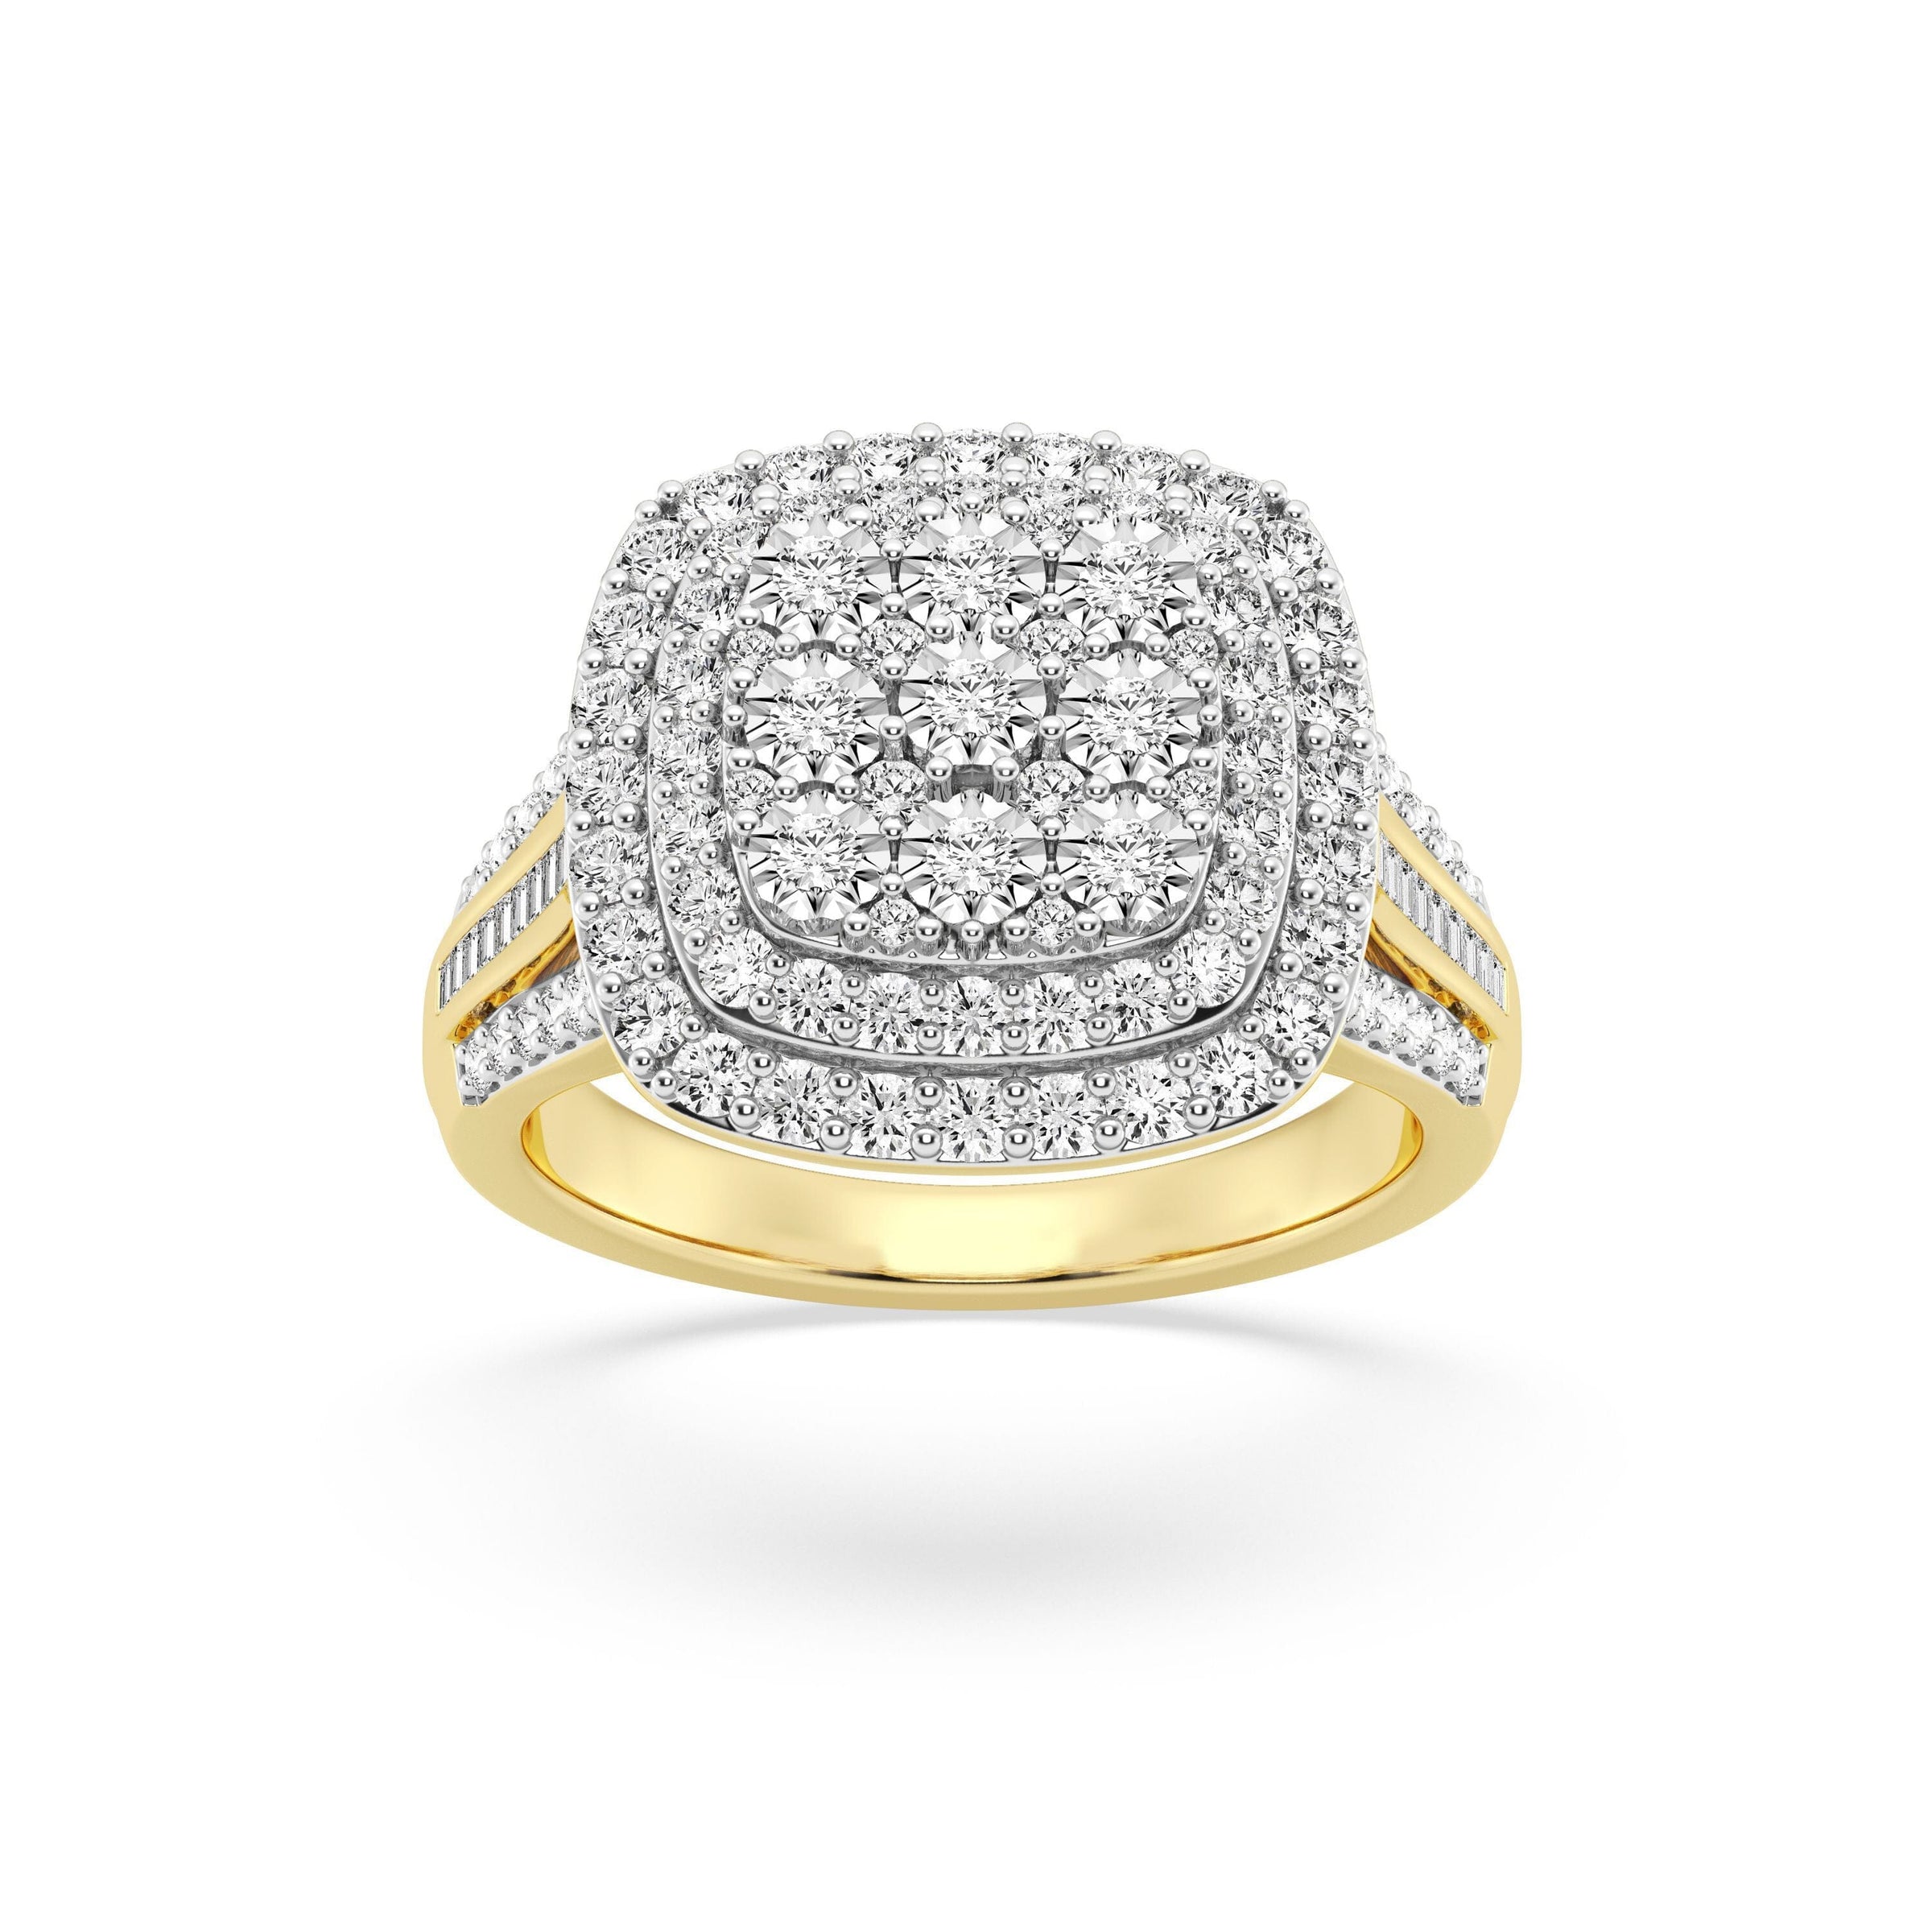 Double Halo Square Look Ring with 1.00ct of Diamonds in 9ct Yellow Gold Rings Bevilles 